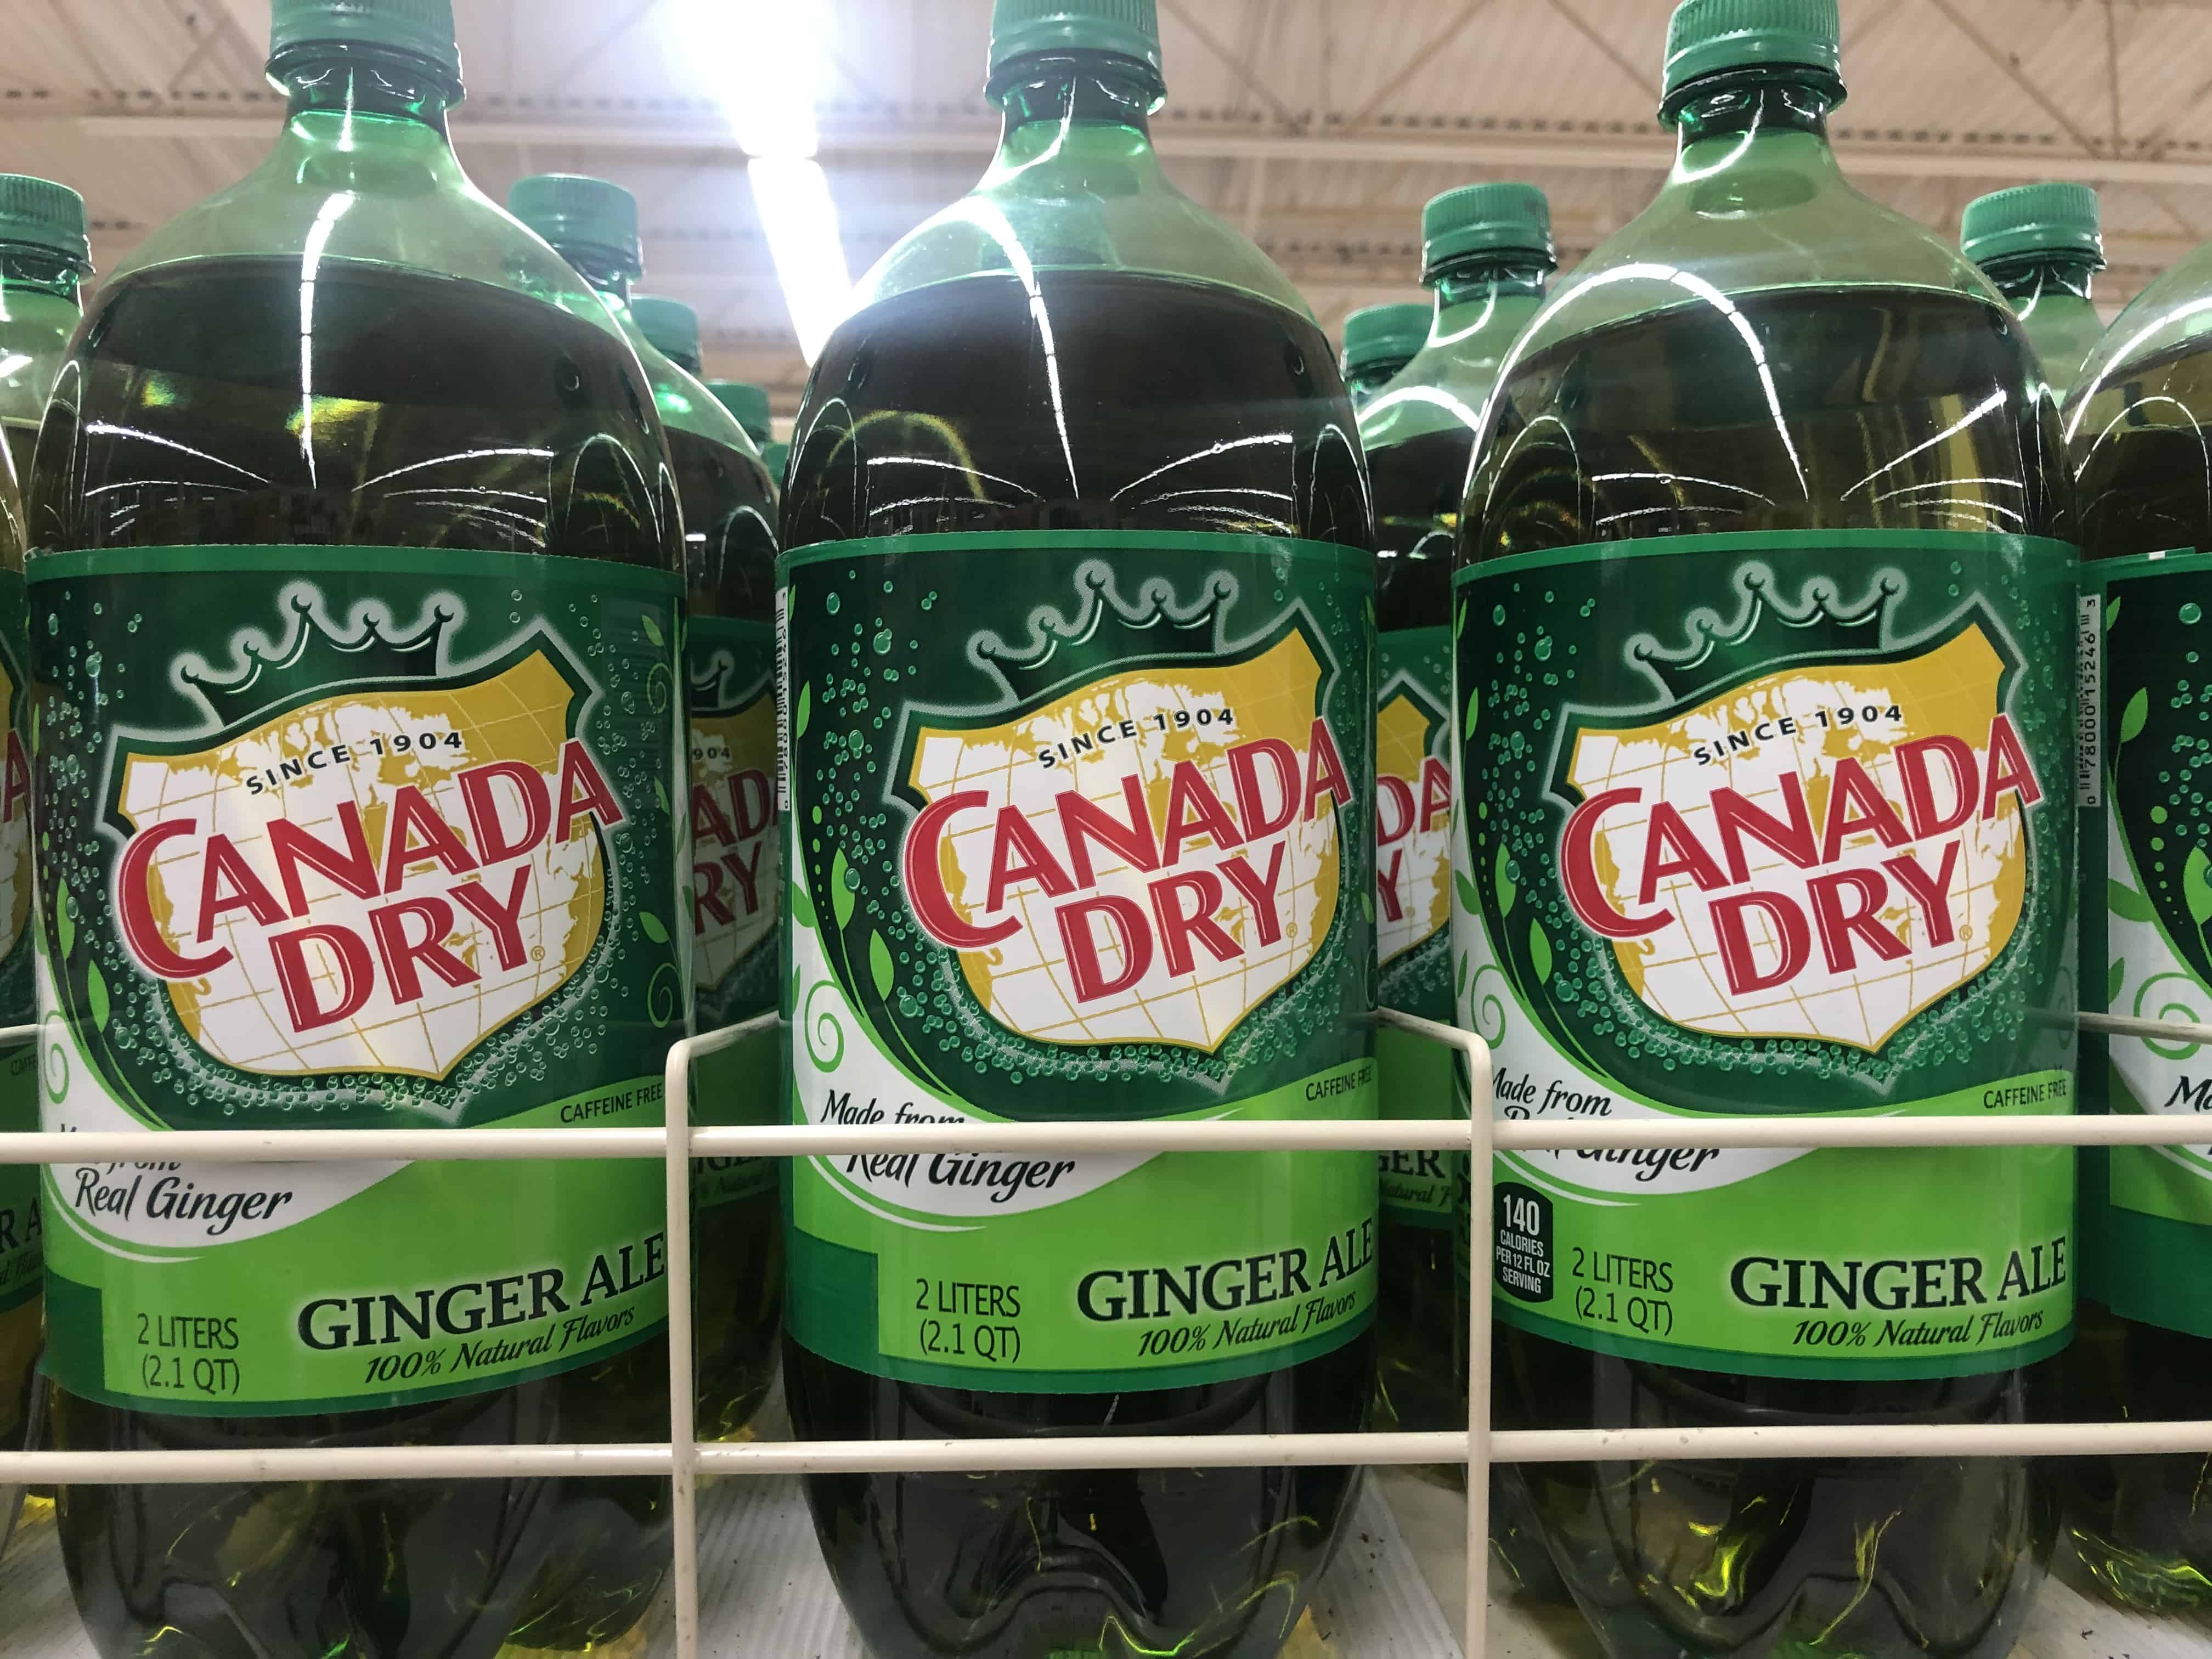 Giant: Canada Dry 2 Liter Drinks & More ONLY $0.84 Each Starting 9/20!